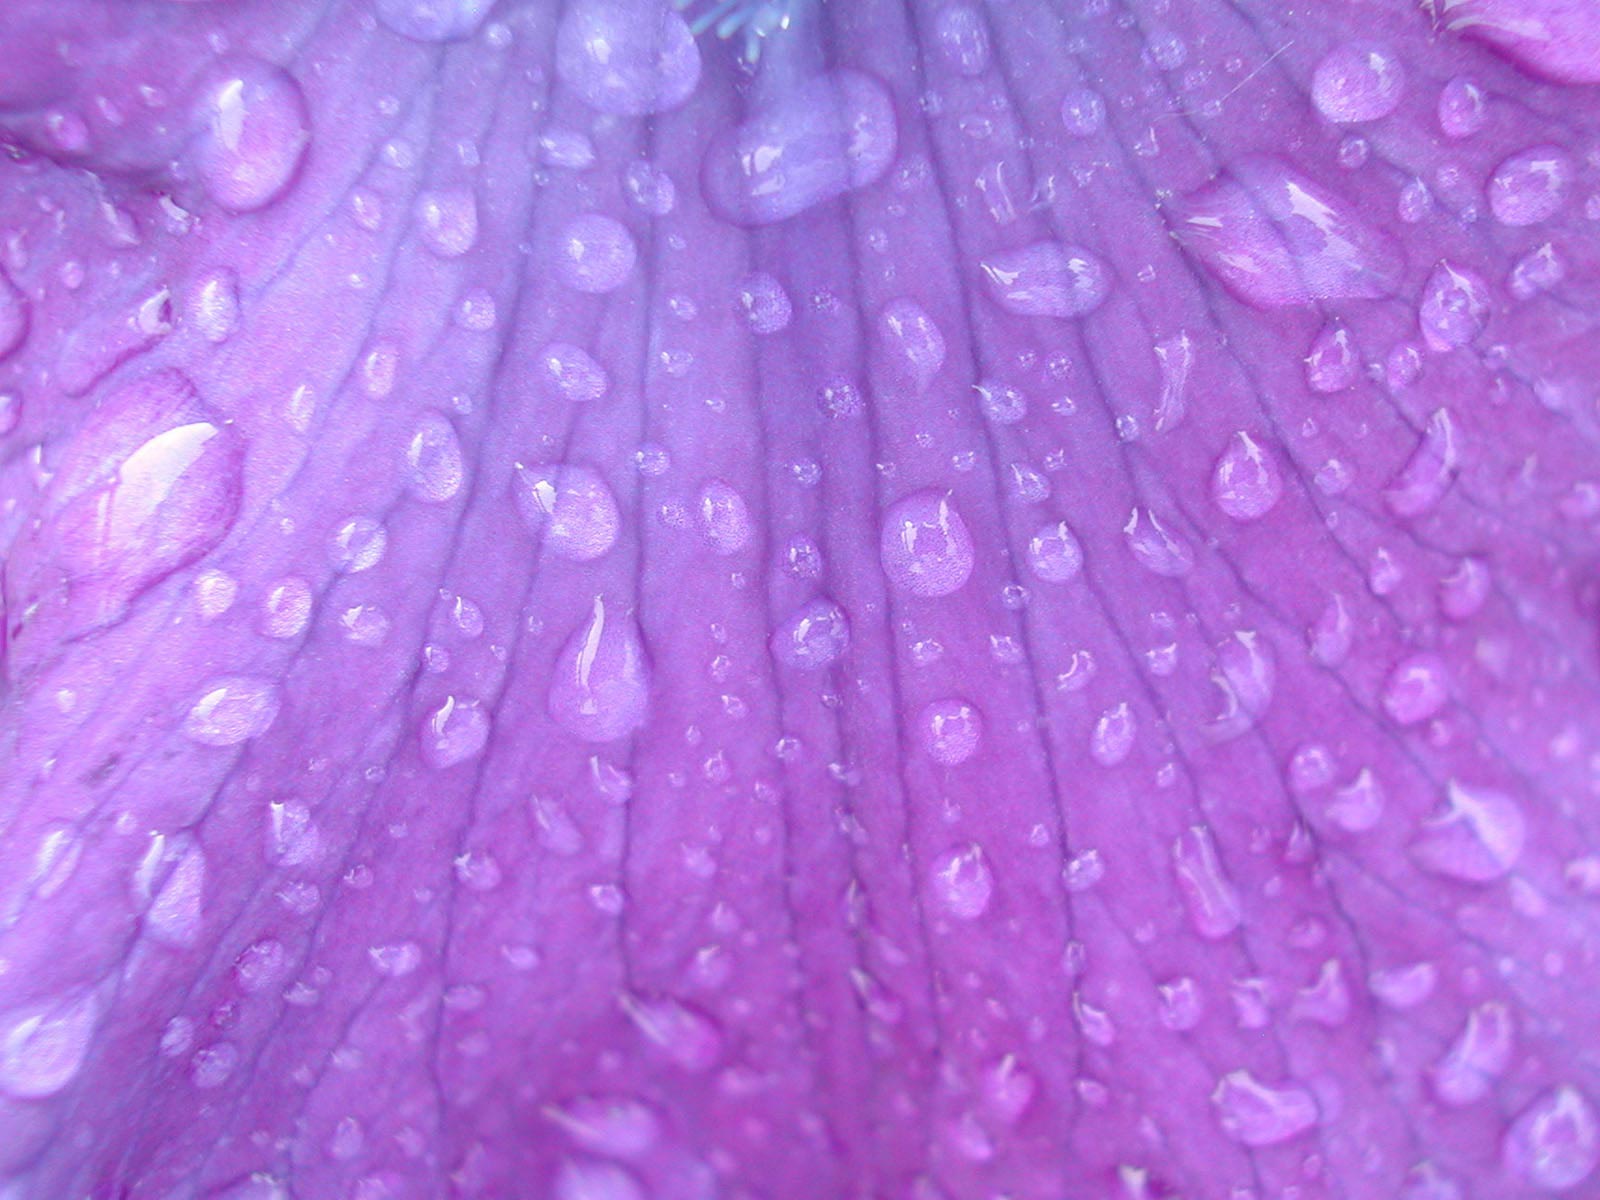 Raindrops on a purple flower powerpoint background